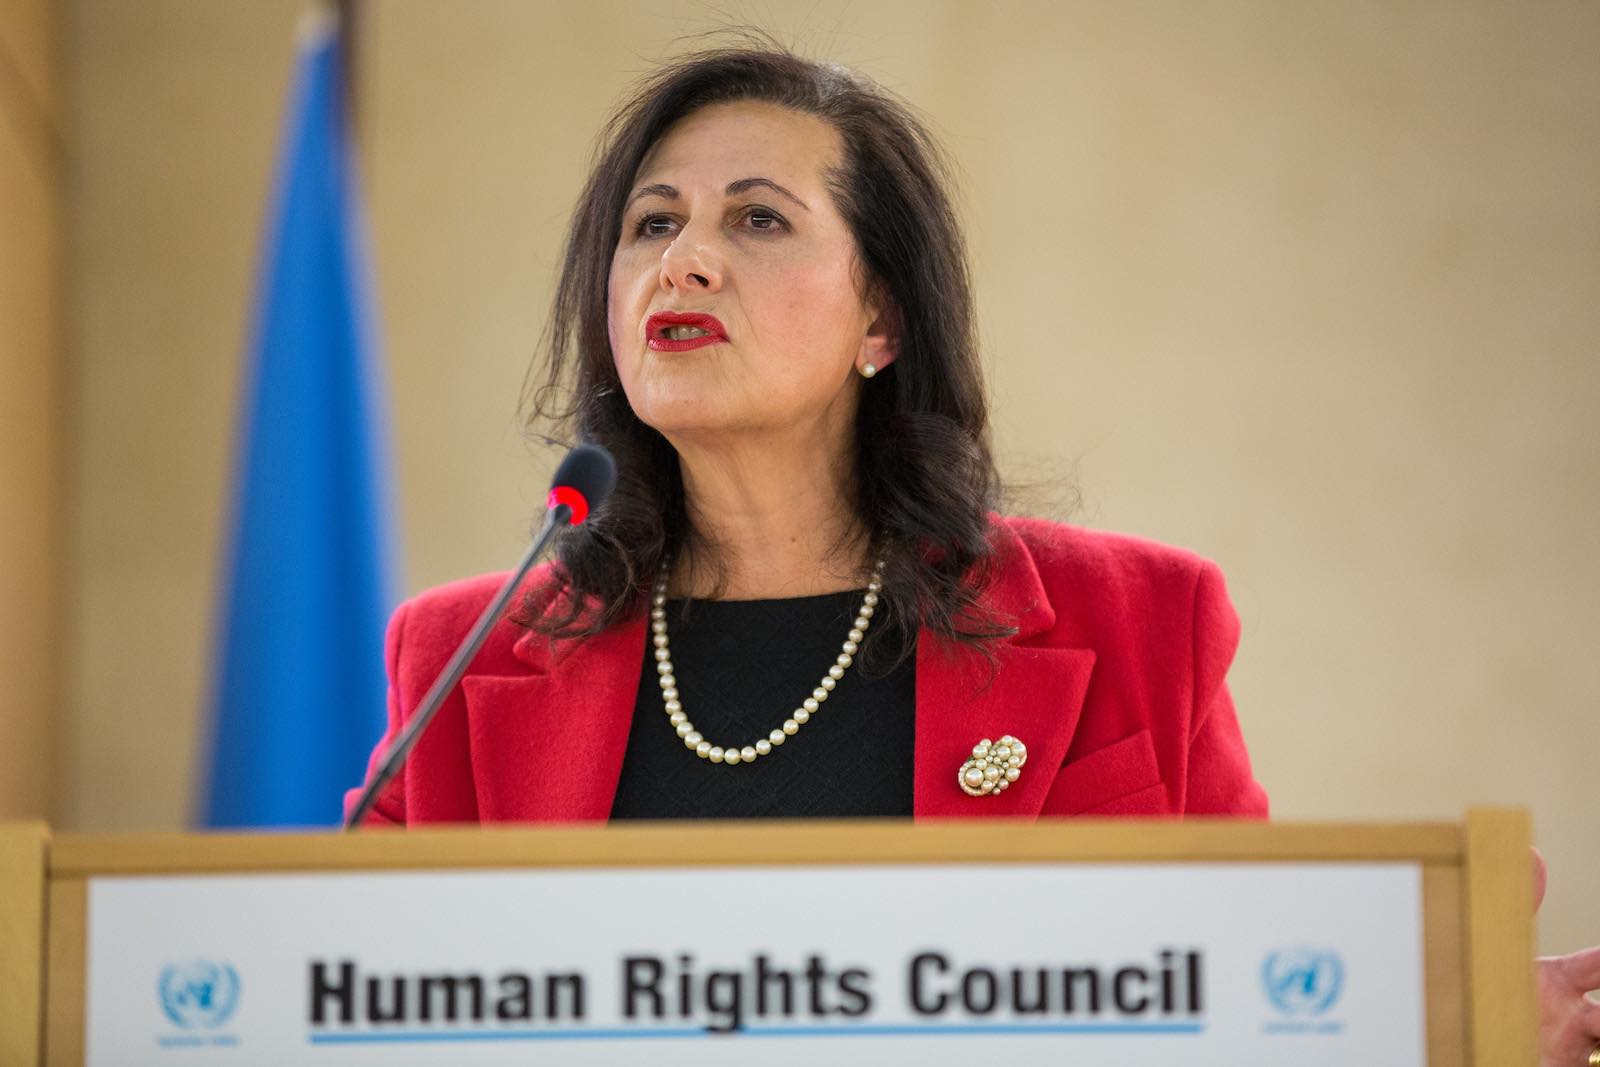 Minister for International Development and the Pacific Concetta Fierravanti-Wells speaking at the UN in February 2017 (Photo: UN Geneva/Flickr)